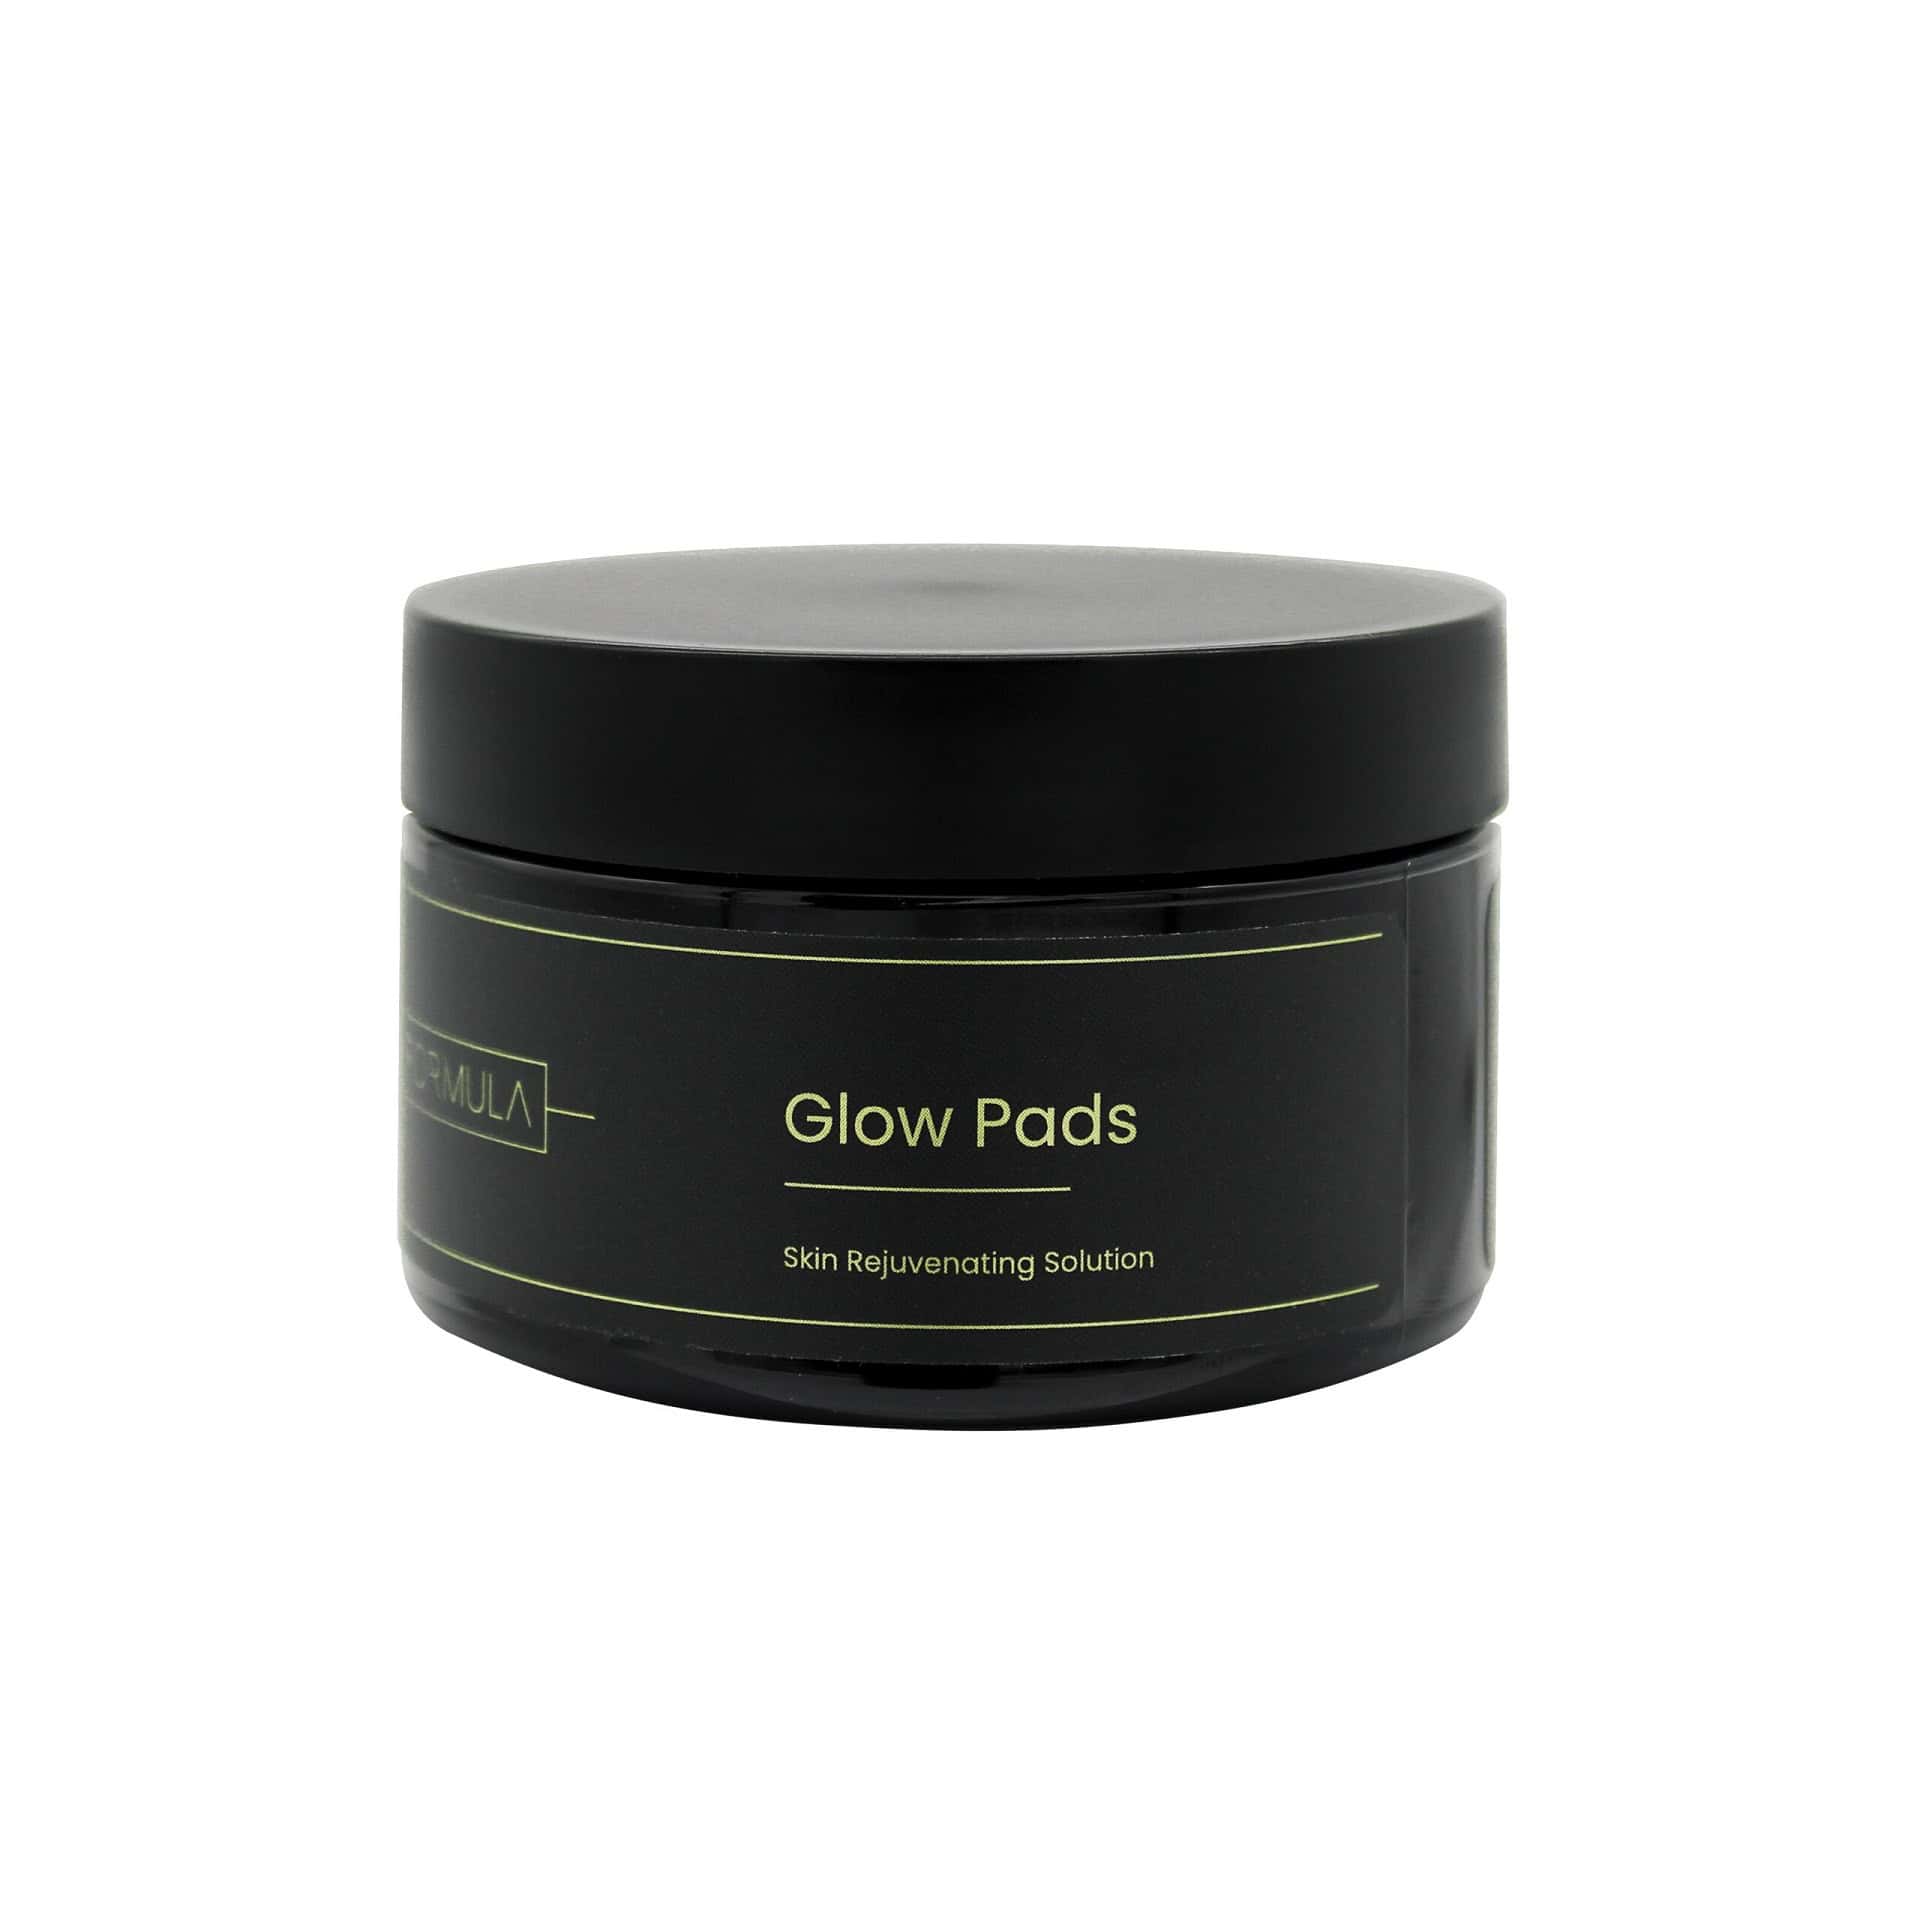 Glow Pads | Skincare Product | The Formula MedSpa in Rye, NY